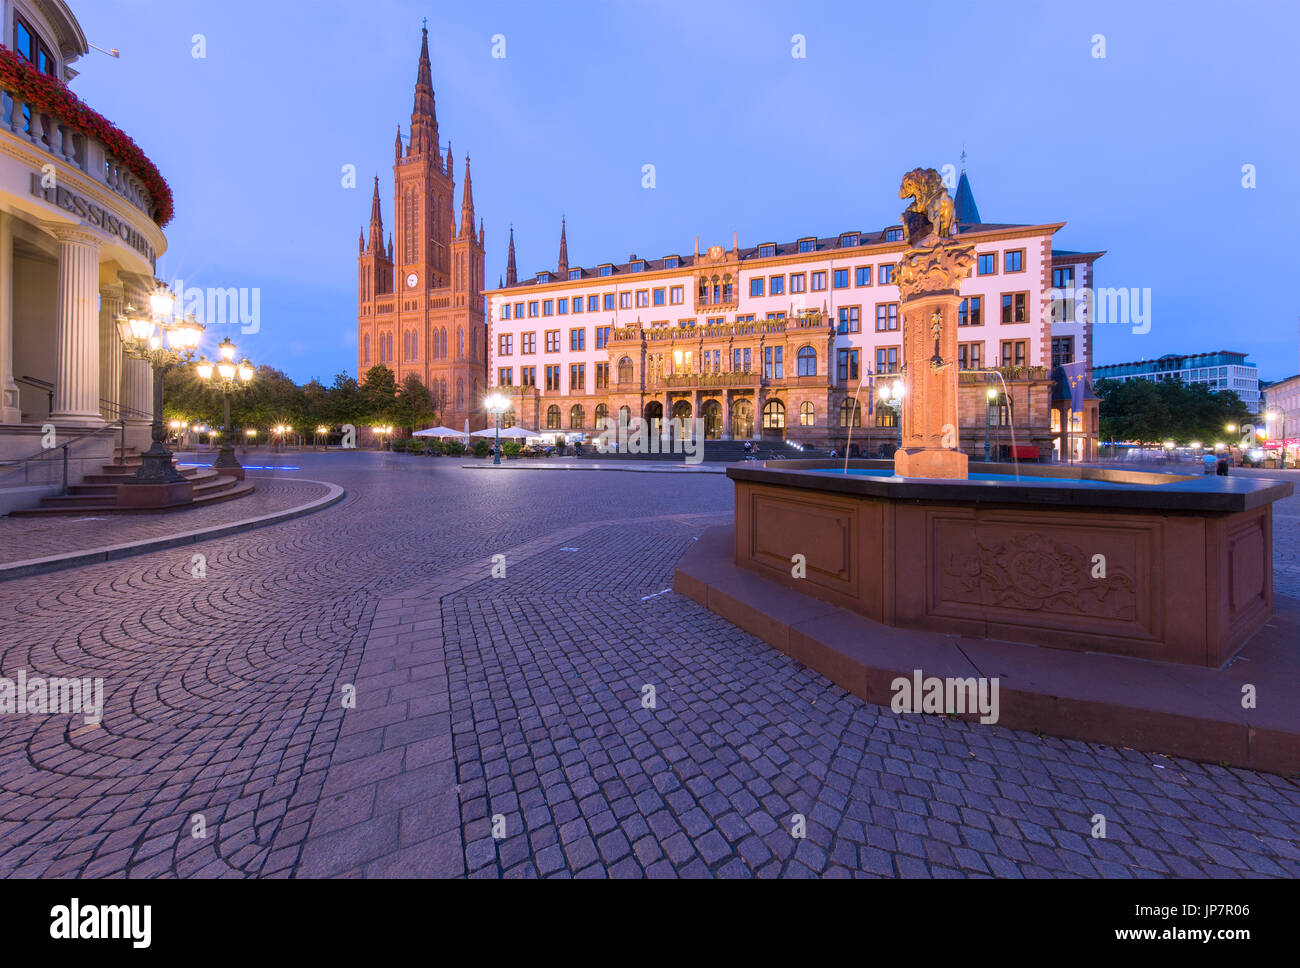 The Schloßplatz (Castle Square) in Wiesbaden as the sun sets, with Marktkirche and City Hall in the background Stock Photo